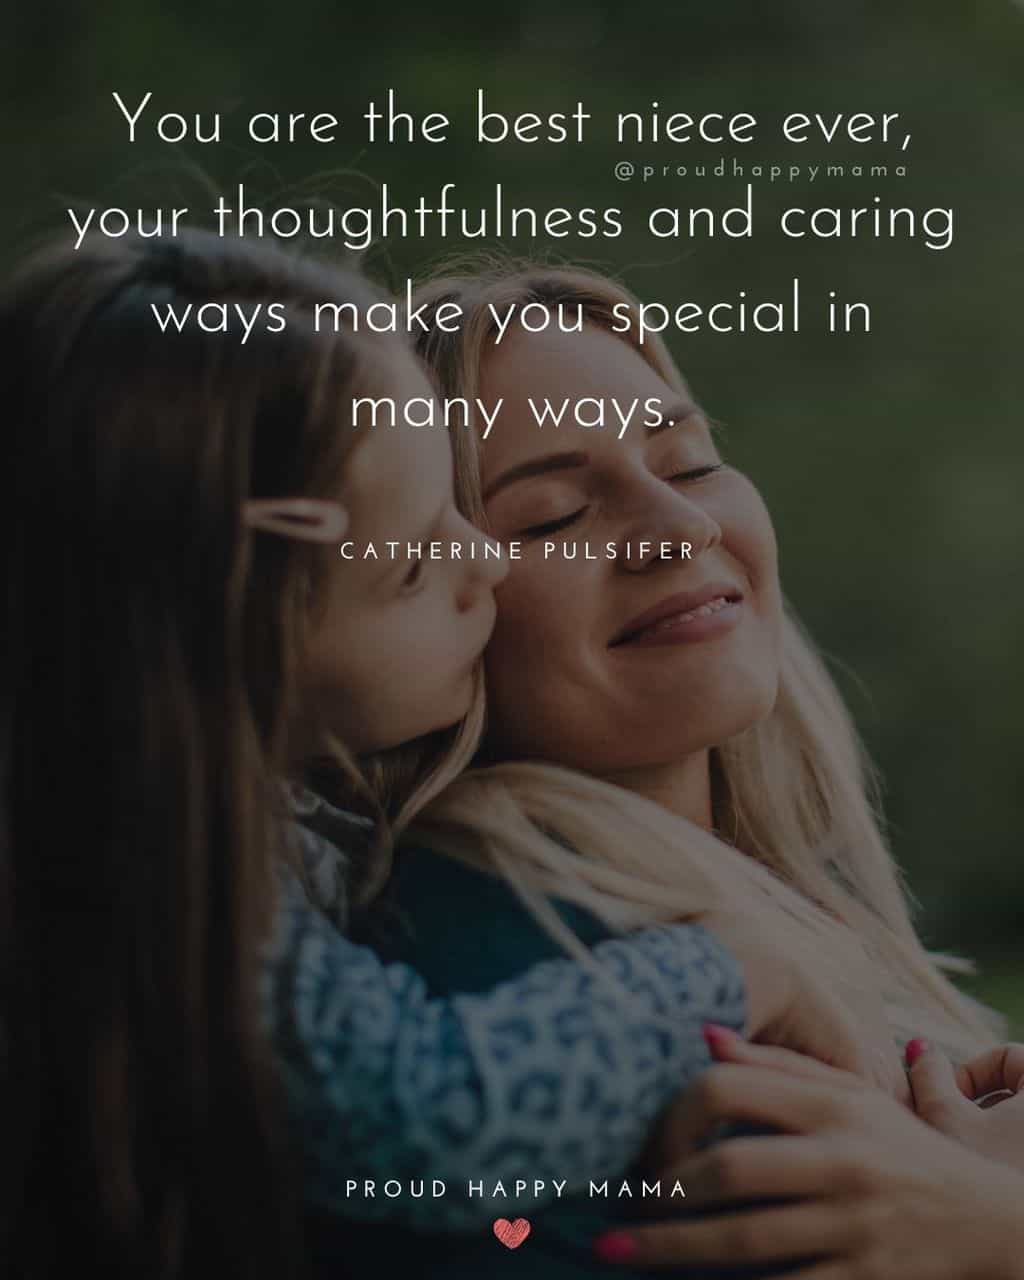 Niece Quotes - You are the best niece ever, your thoughtfulness and caring ways make you special in many ways. - Catherine Pulsifer